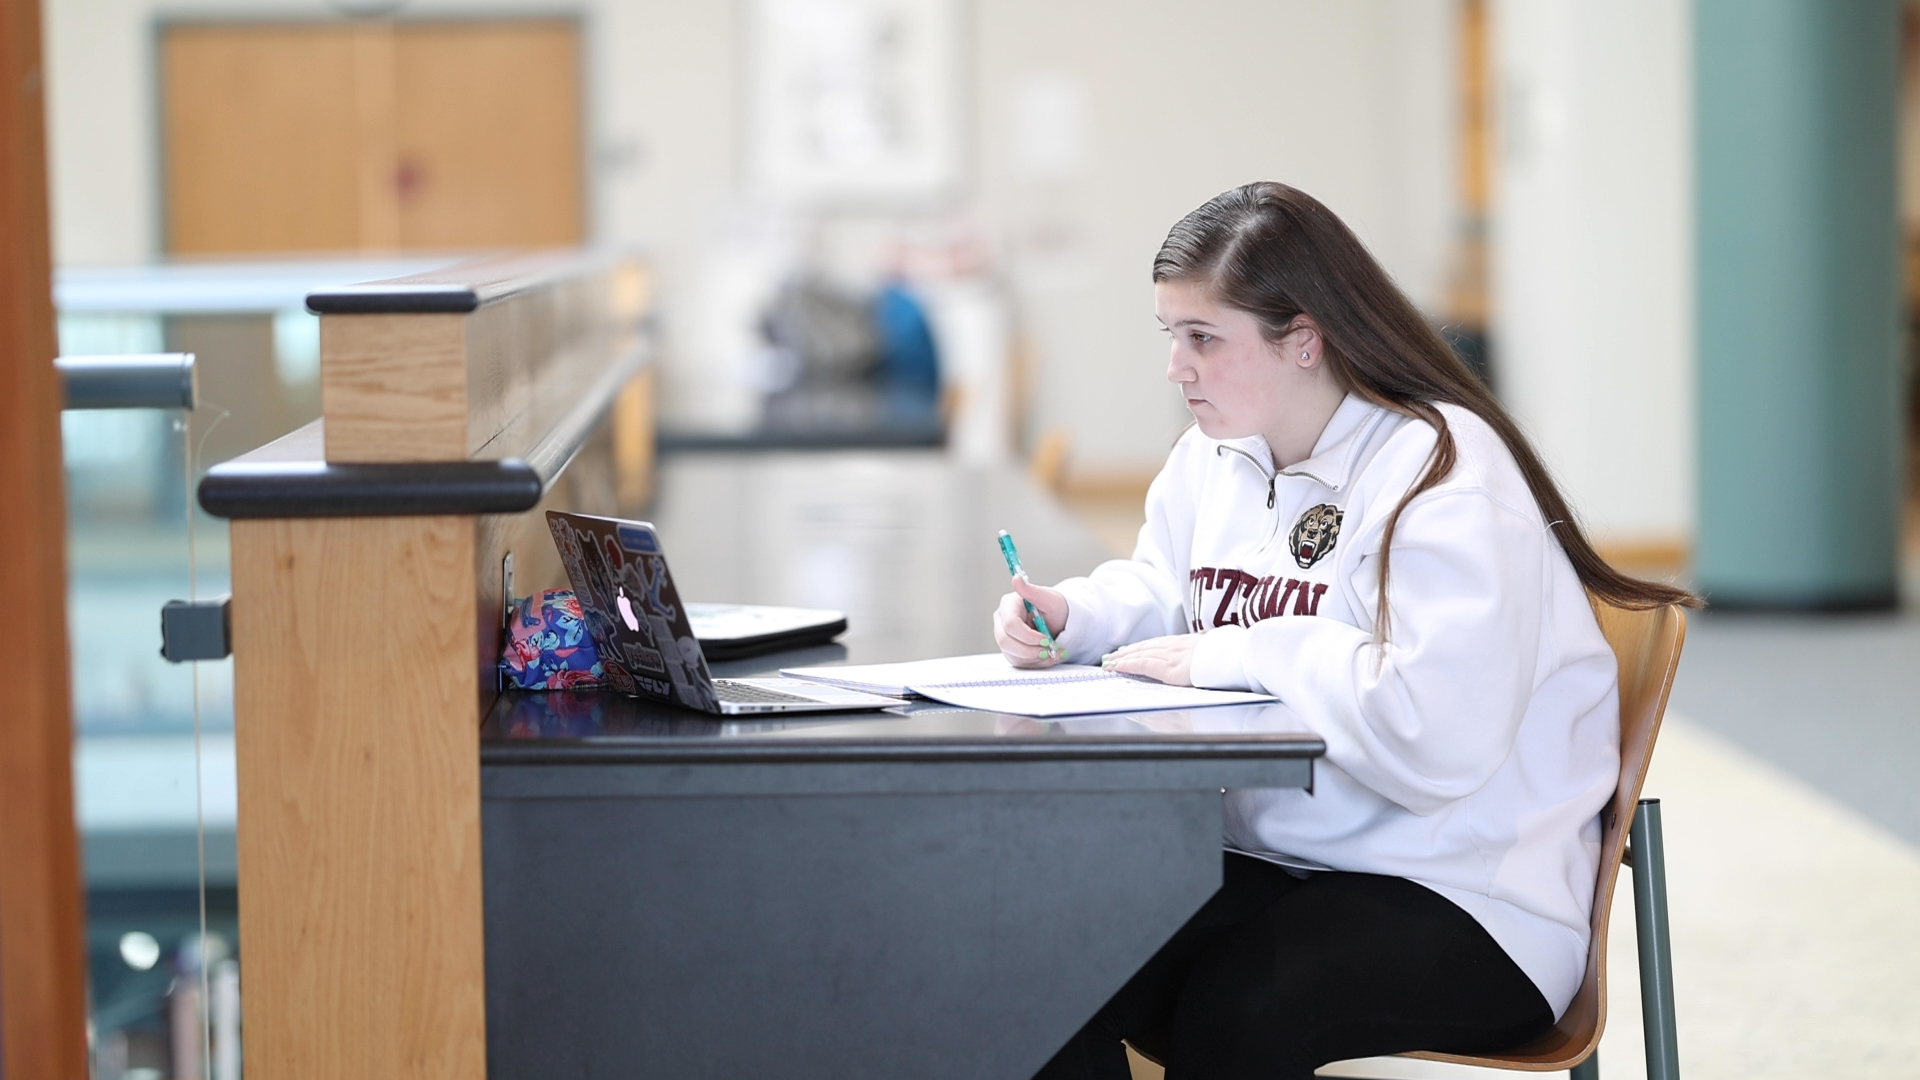 KU student working at a desk in the library